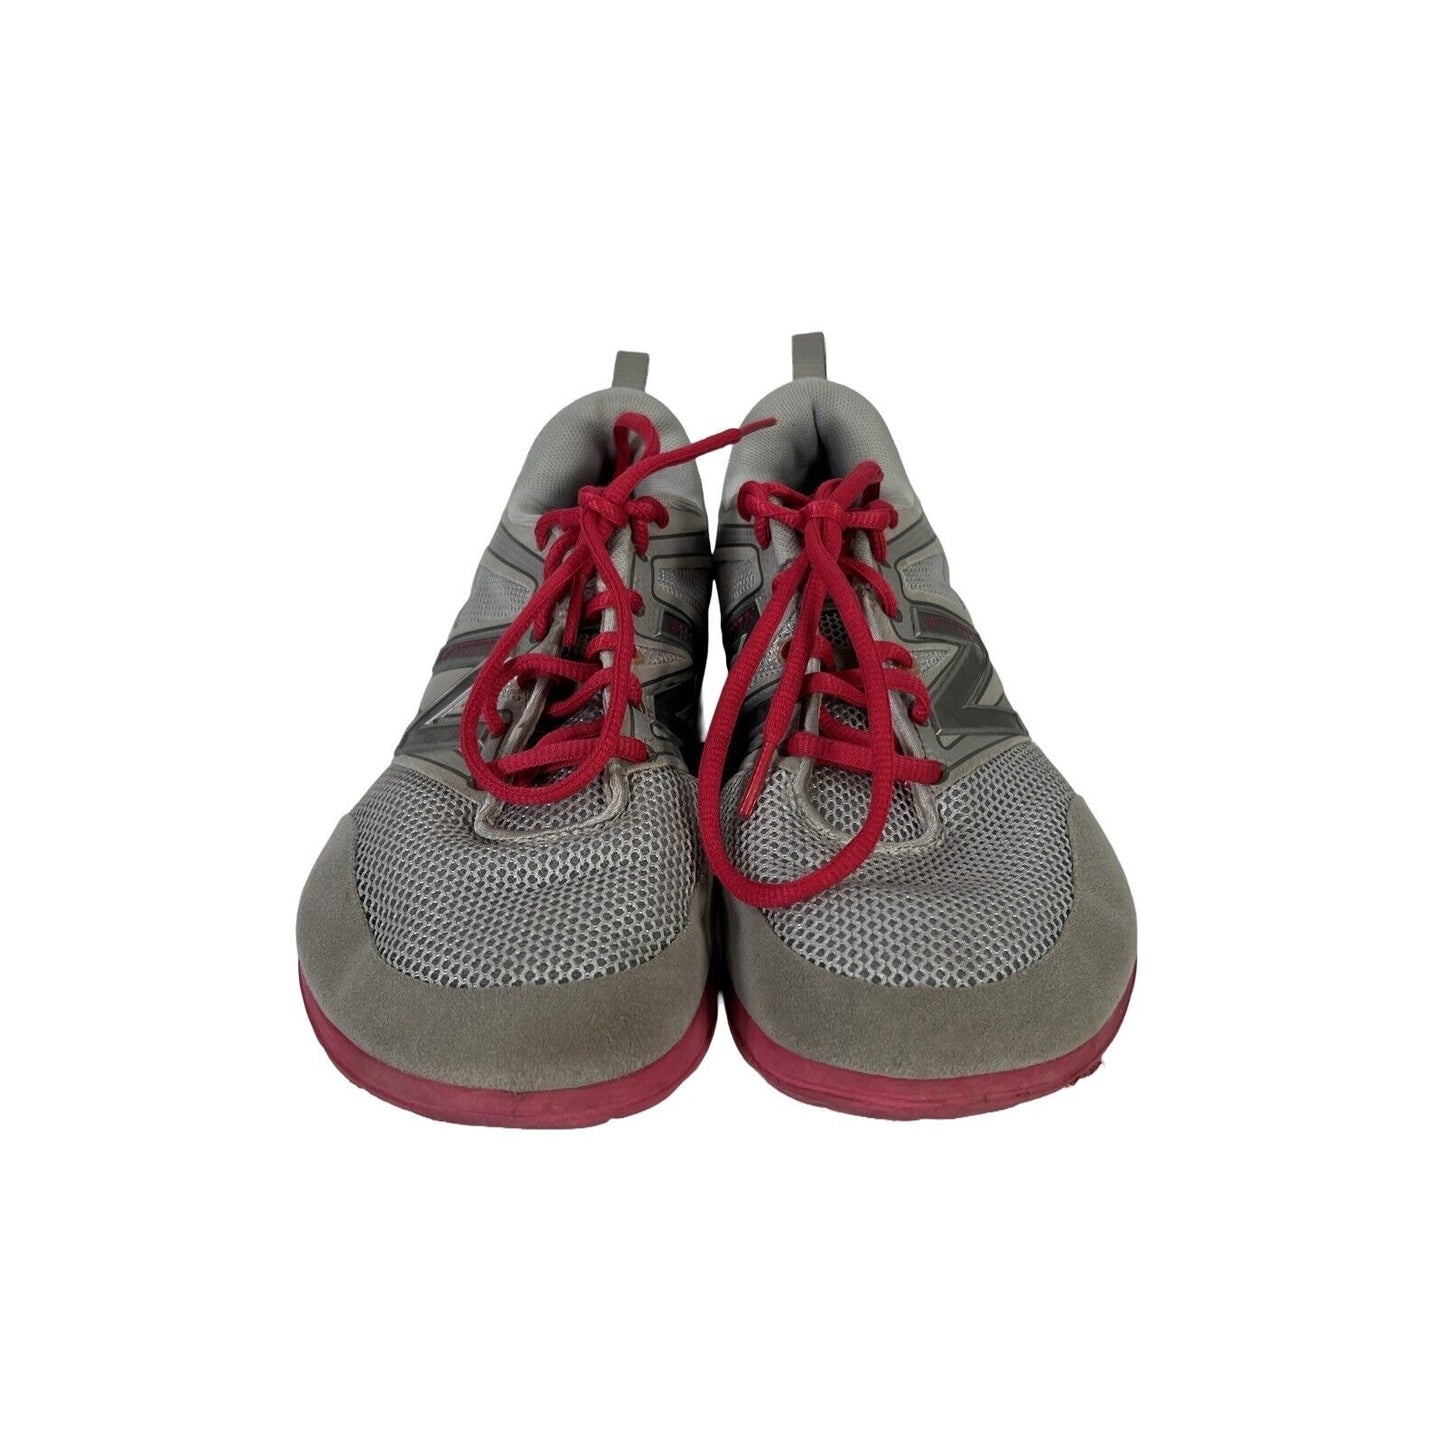 New Balance Women's Gray/Pink Minimus Lace Up Athletic Shoes - 8